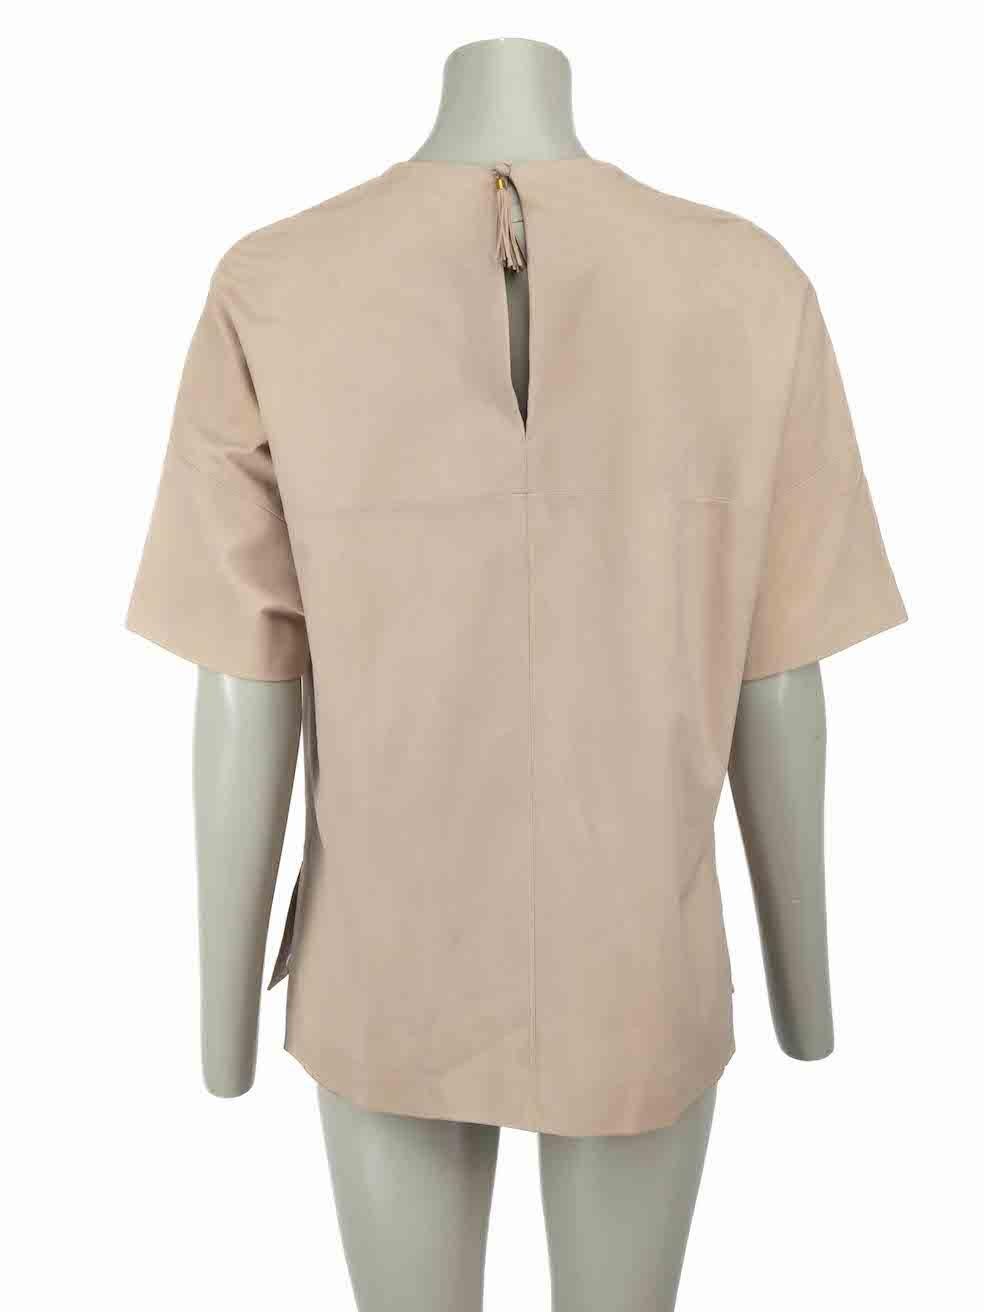 Gucci Beige Leather T-Shirt Size S In Excellent Condition For Sale In London, GB